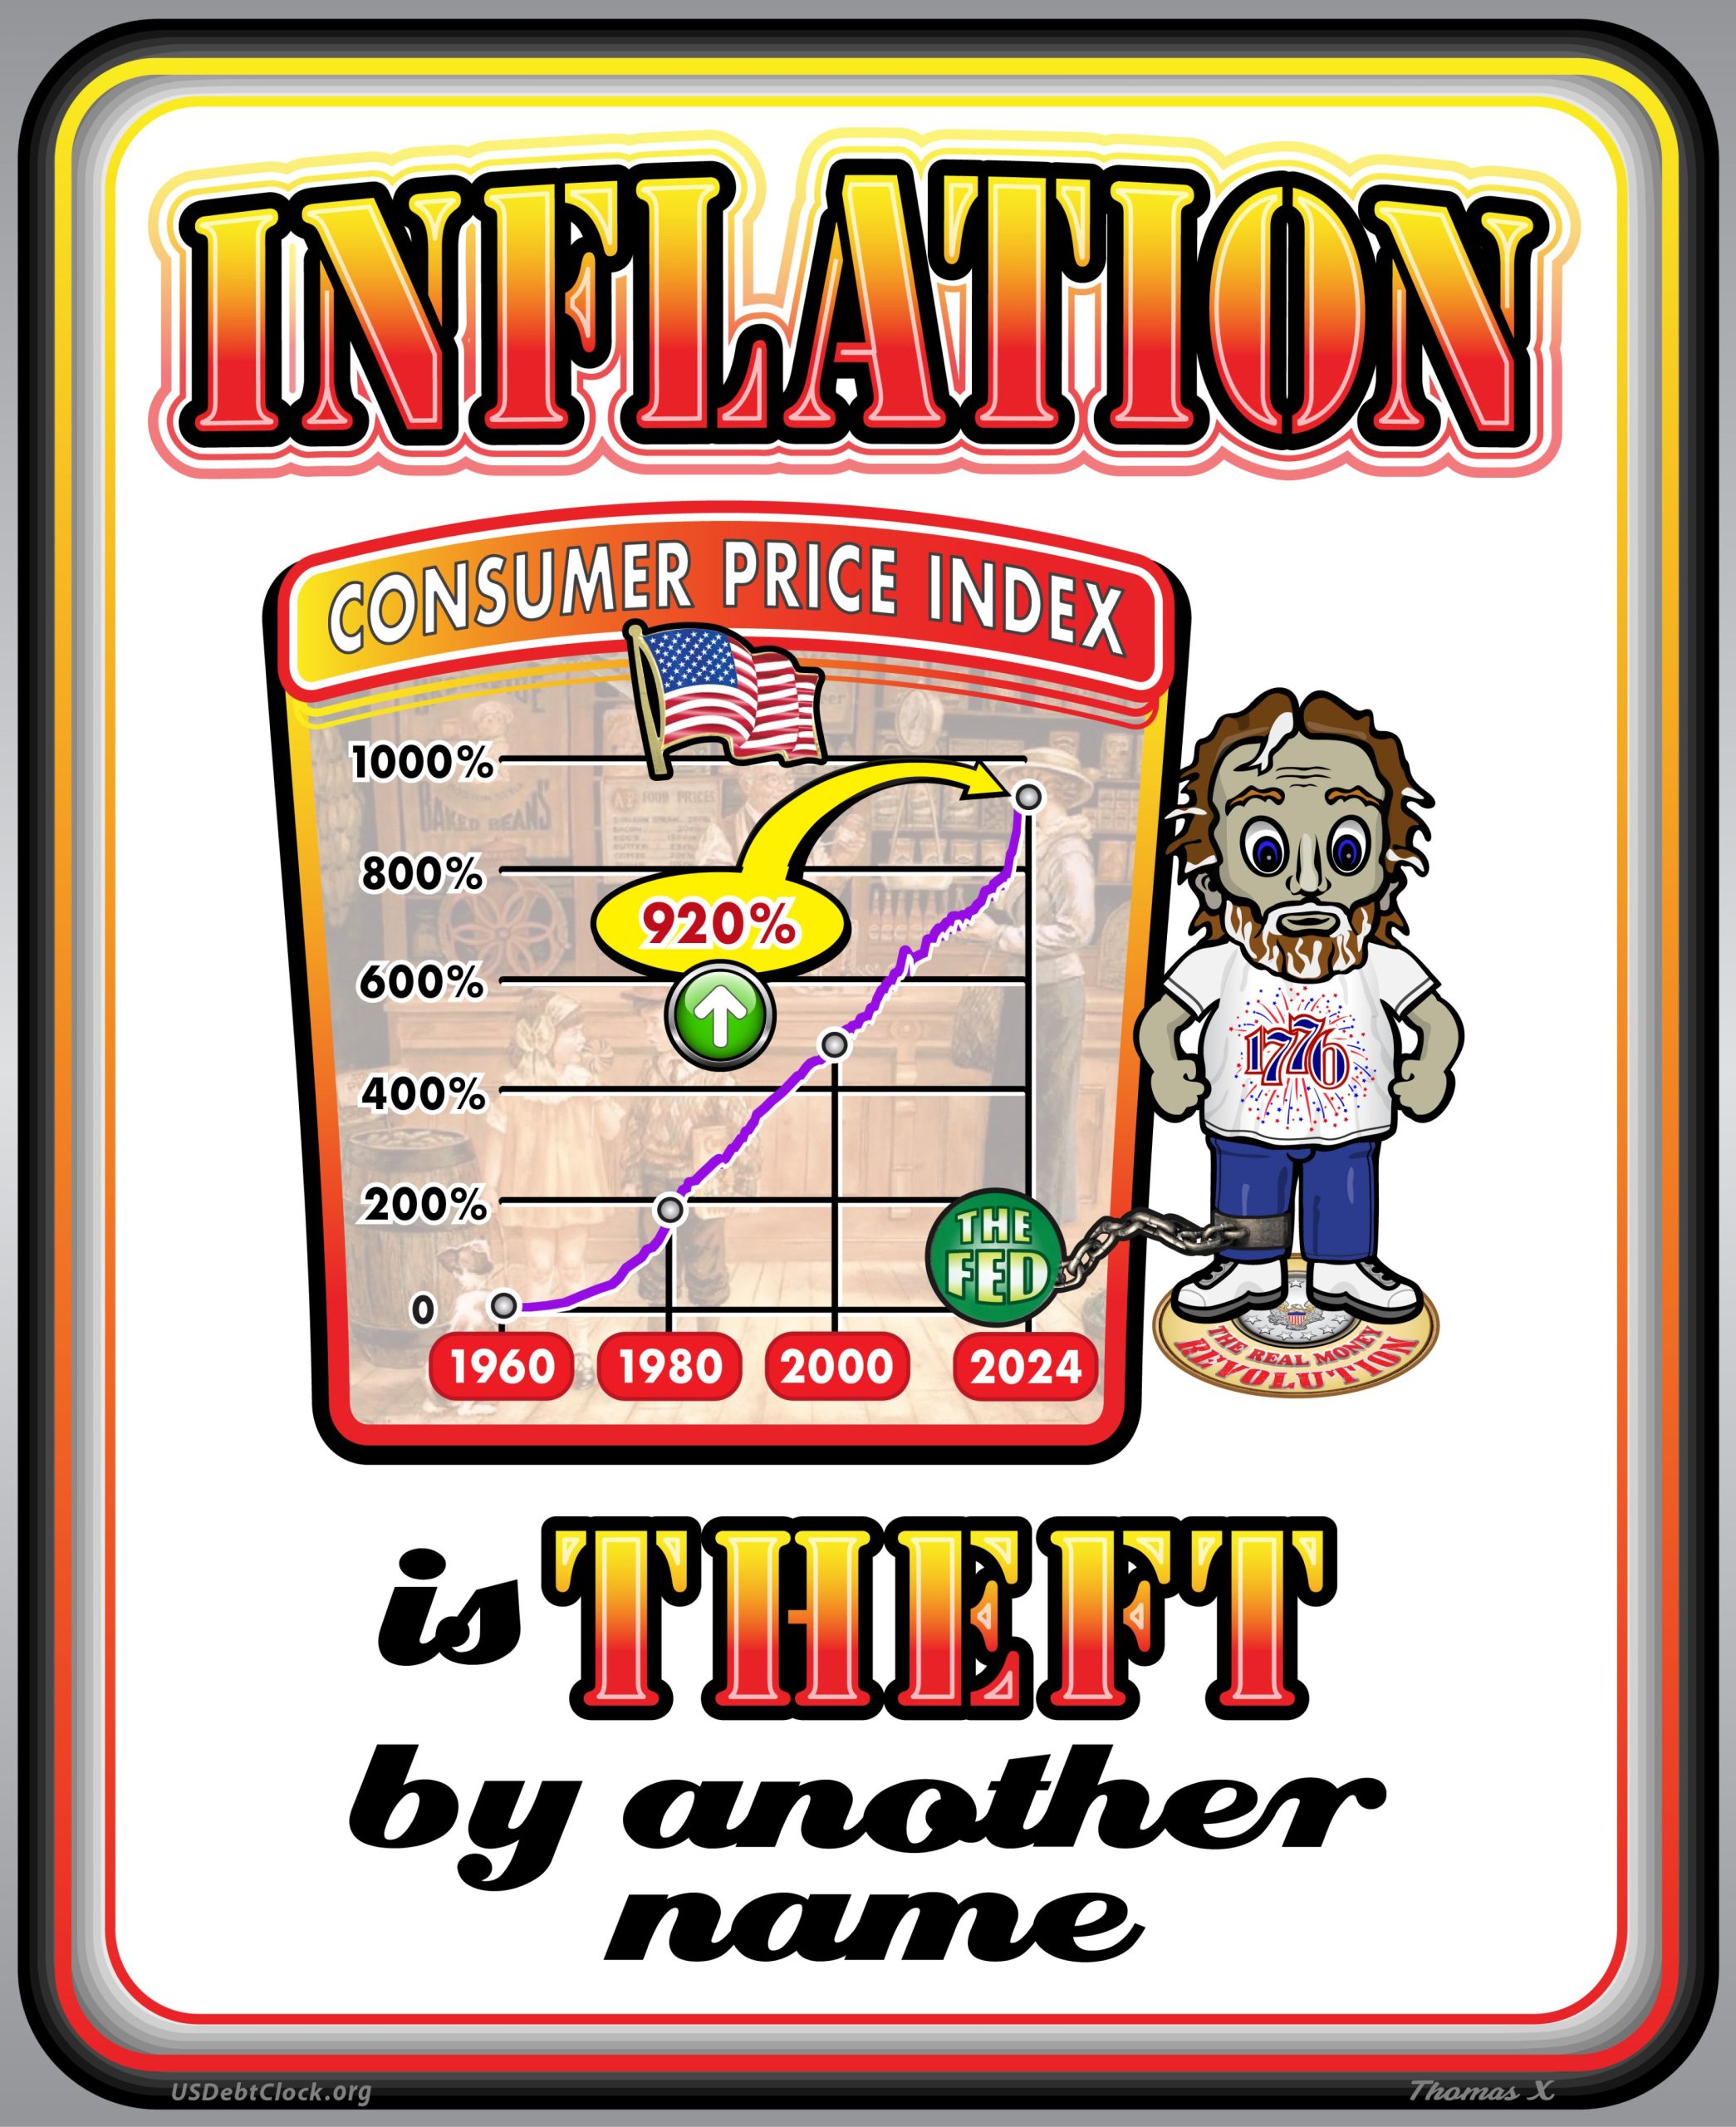 Understanding the Consumer Price Index (CPI) and the Transition to Treasury Certificates